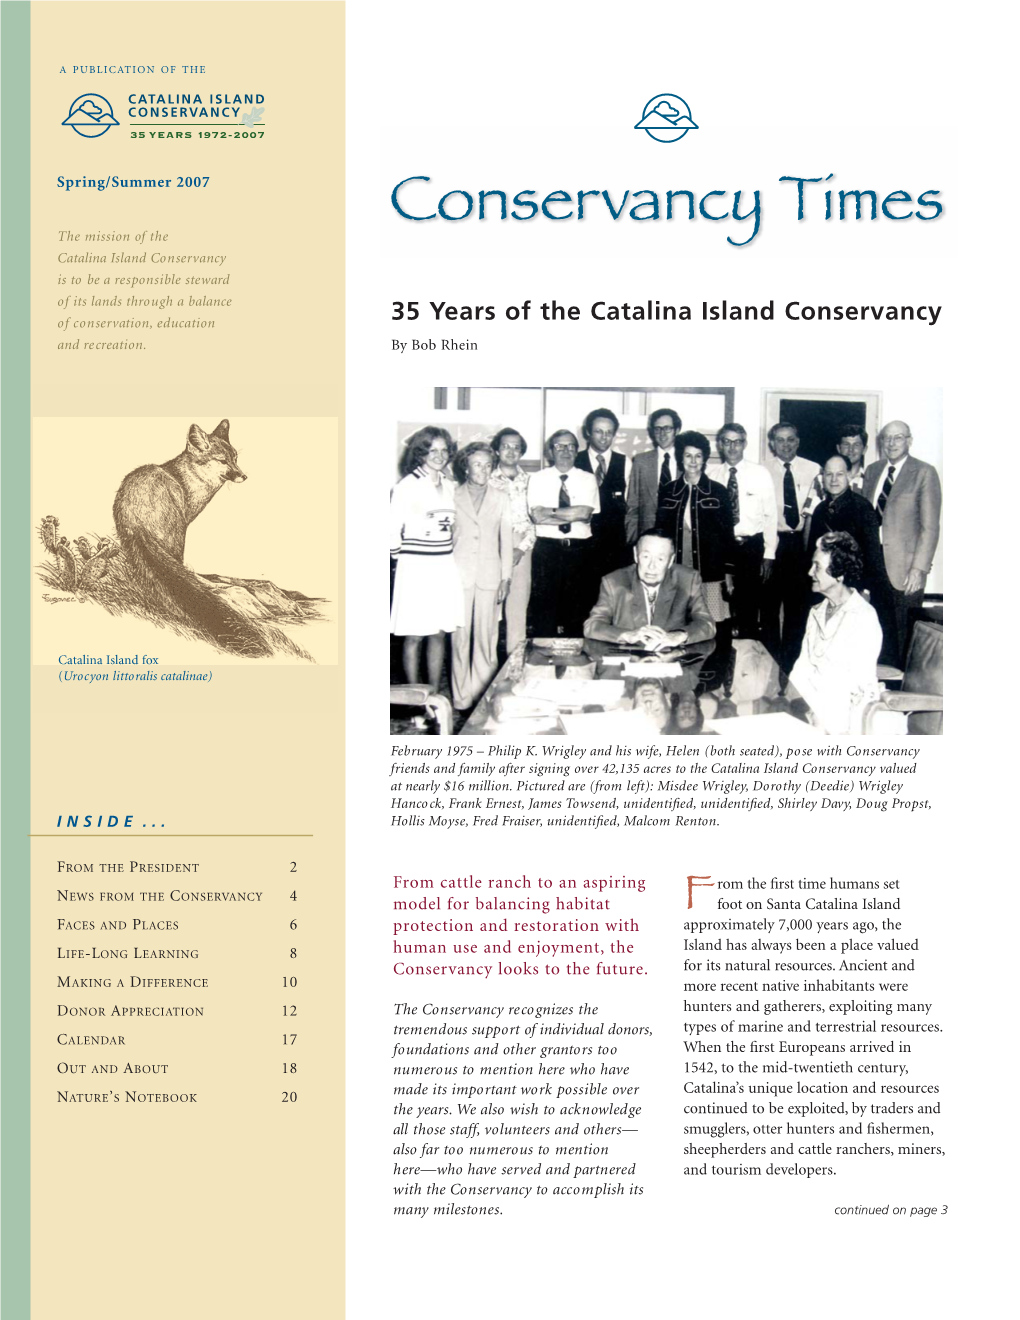 35 Years of the Catalina Island Conservancy and Recreation